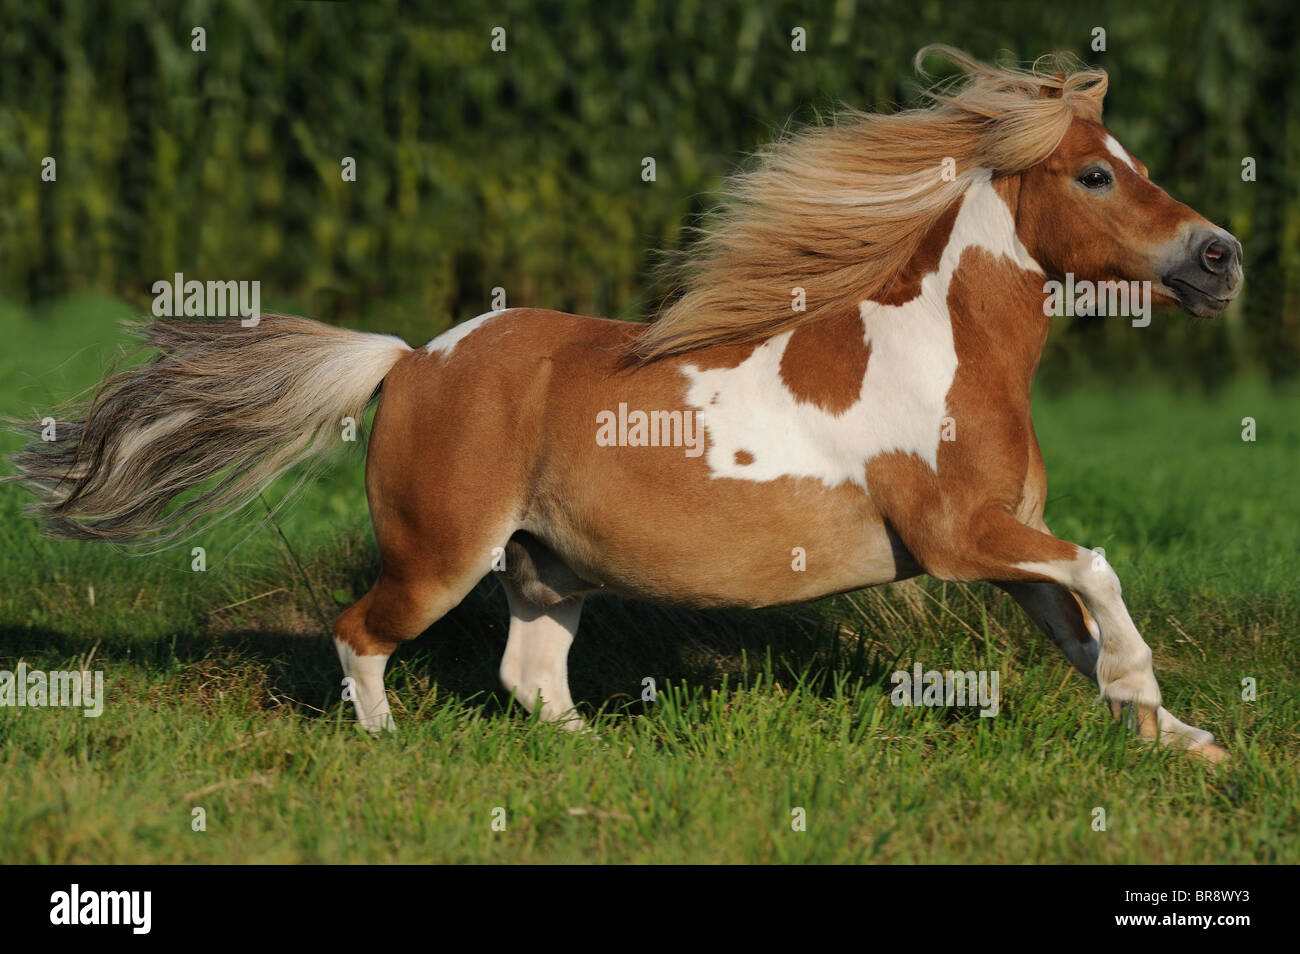 Shetland Pony (Equus ferus caballus). Pinto gelding at a gallop on a meadow. Stock Photo